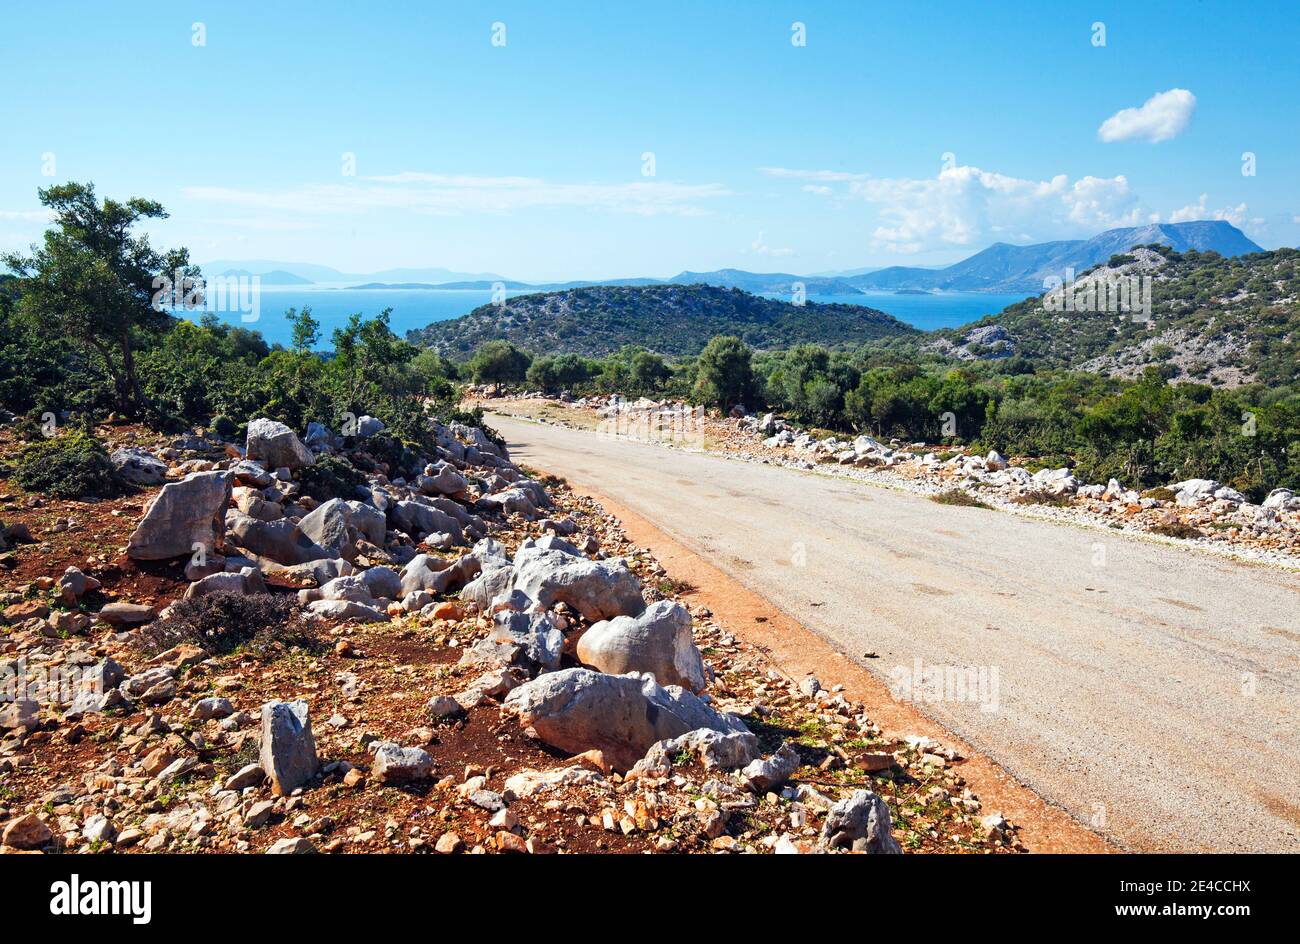 A narrow country road leads through the mountainous region in the hinterland of Astakos in central Greece, with a view of the island of Kalamos Stock Photo